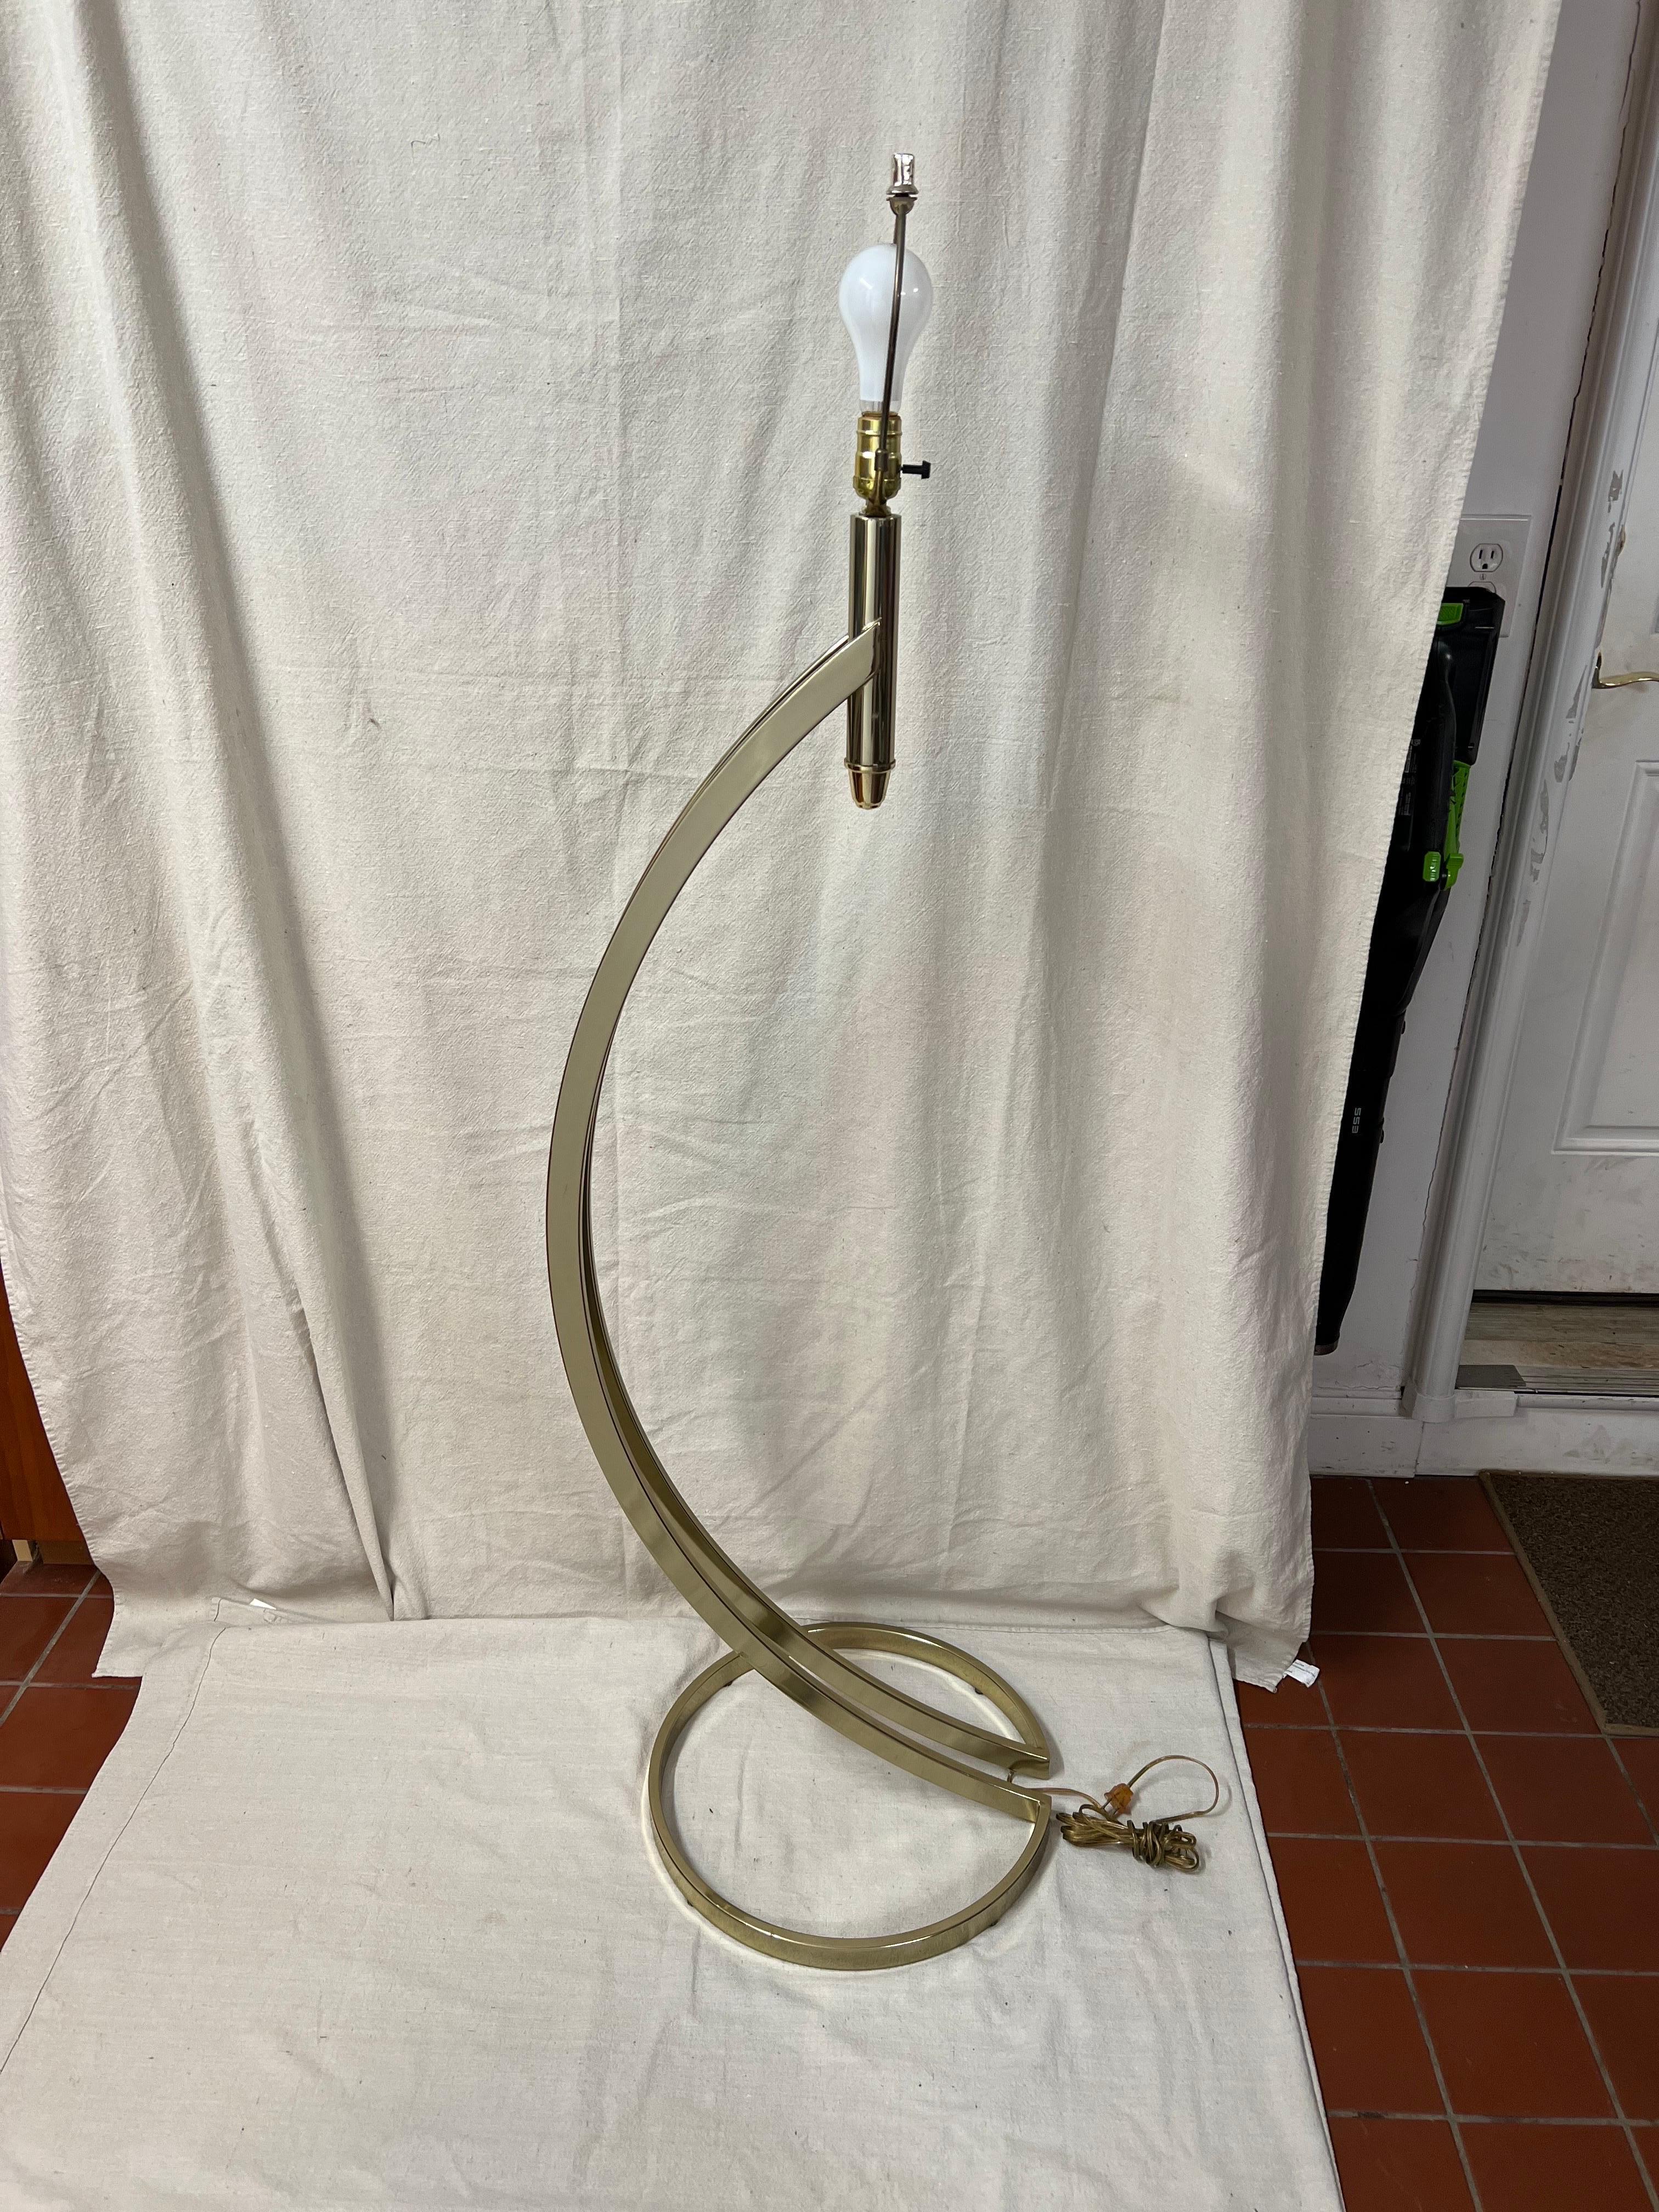 Post Modern Brass Floor Lamp. Authentic midcentury to Post modern style. This floor lamp could also go with Art Deco styles. Great reading lamp. Non adjustable. No lamp shade